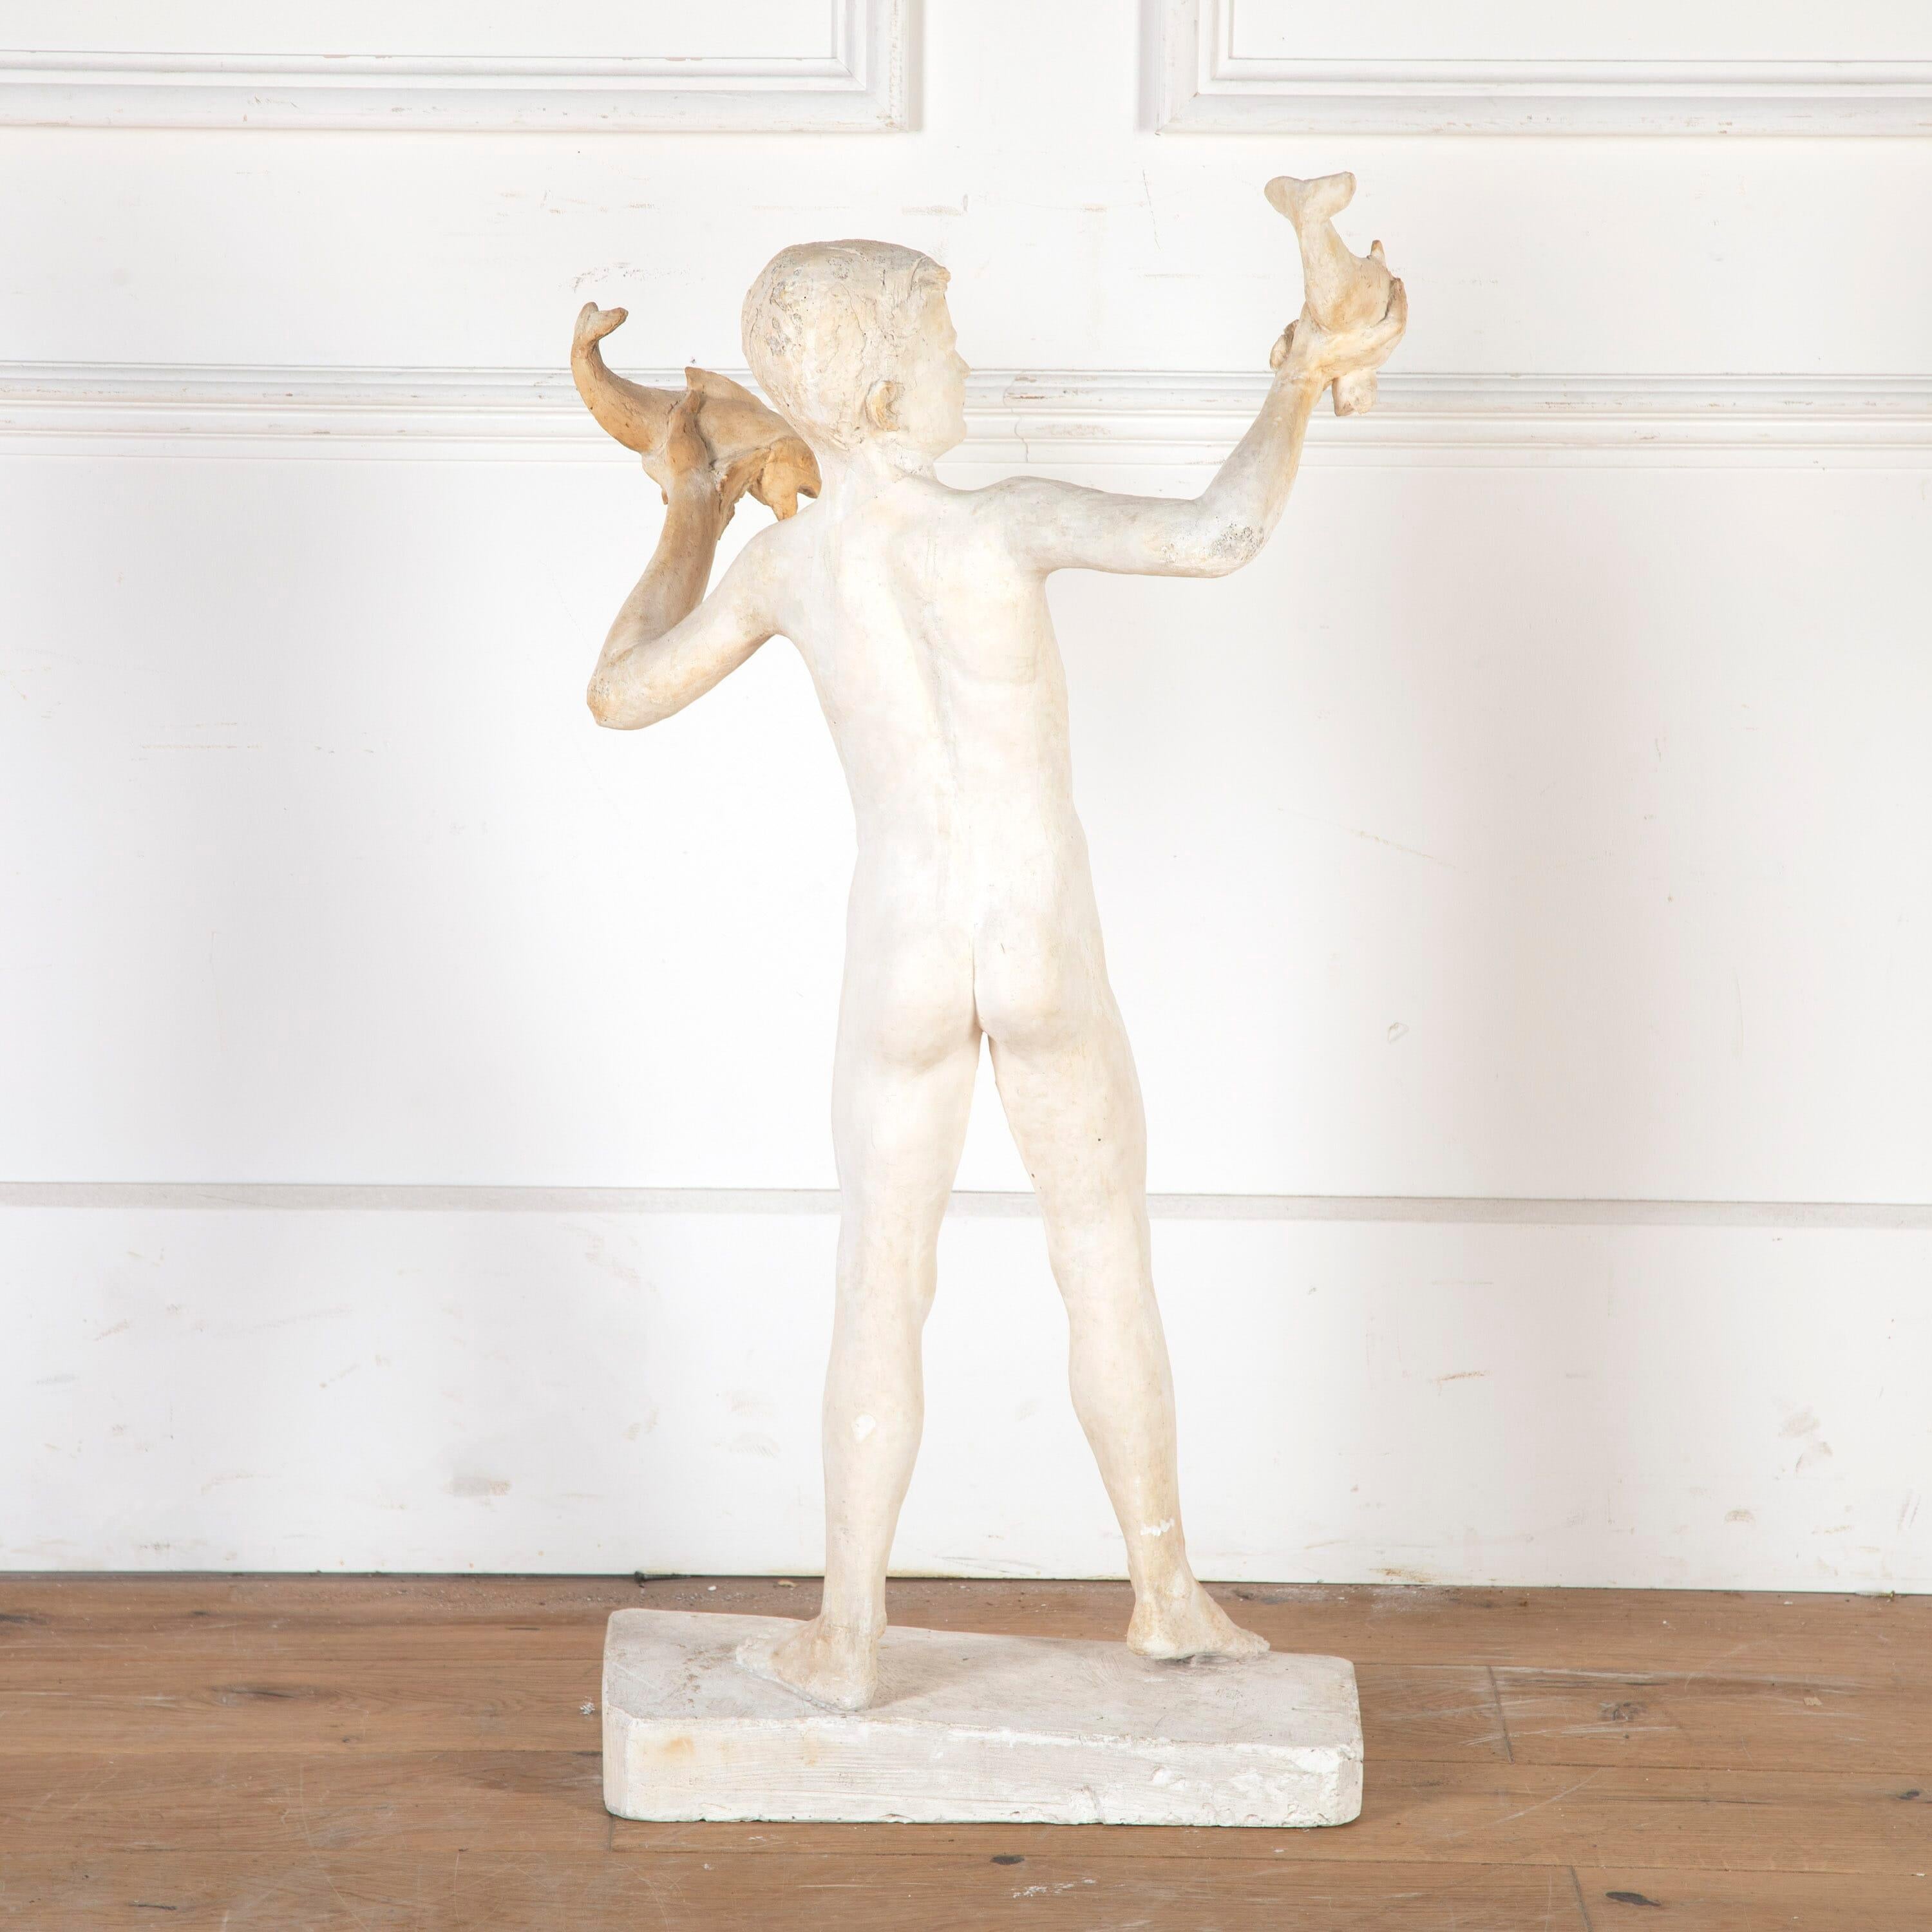 English Plaster Maquette Sculpture of a Young Boy For Sale